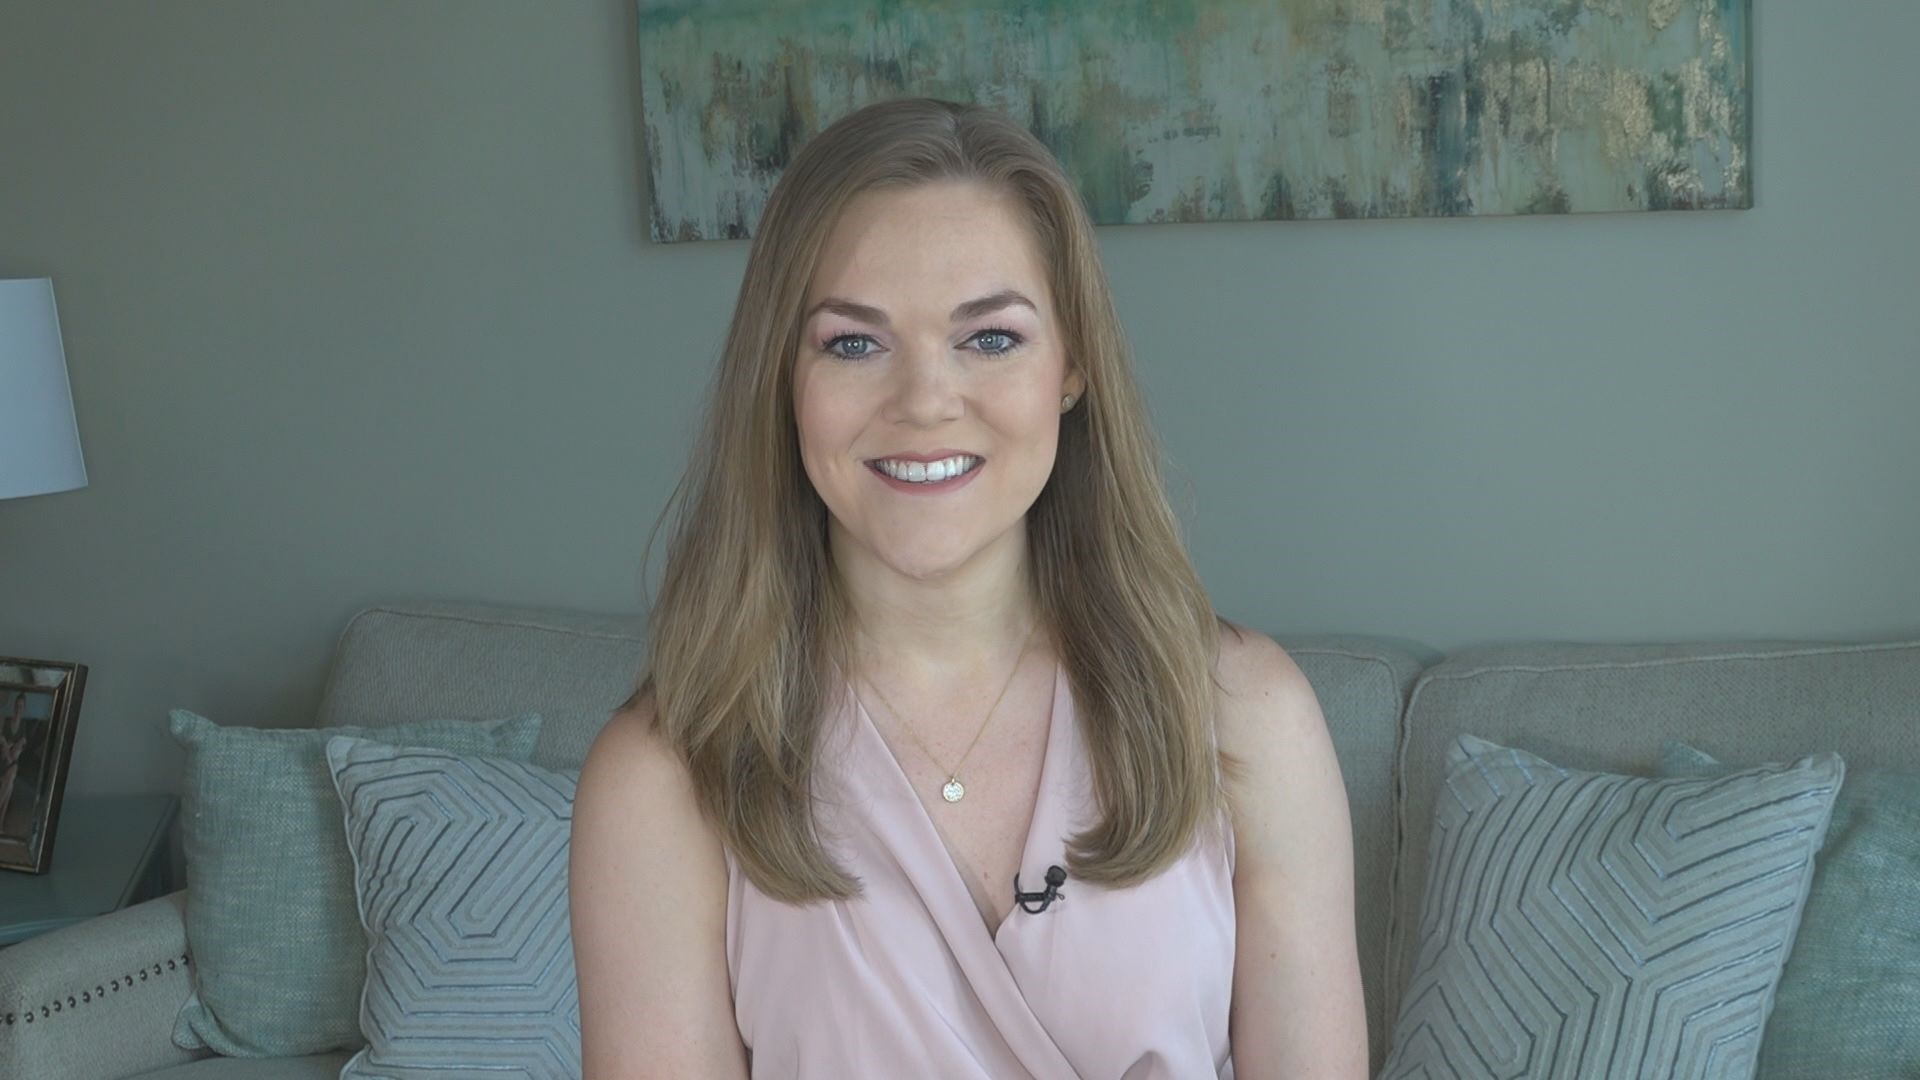 As more staff returns to work, WFMY News 2's Maddie Garnder looks back at some of the best and worst parts of working at home.